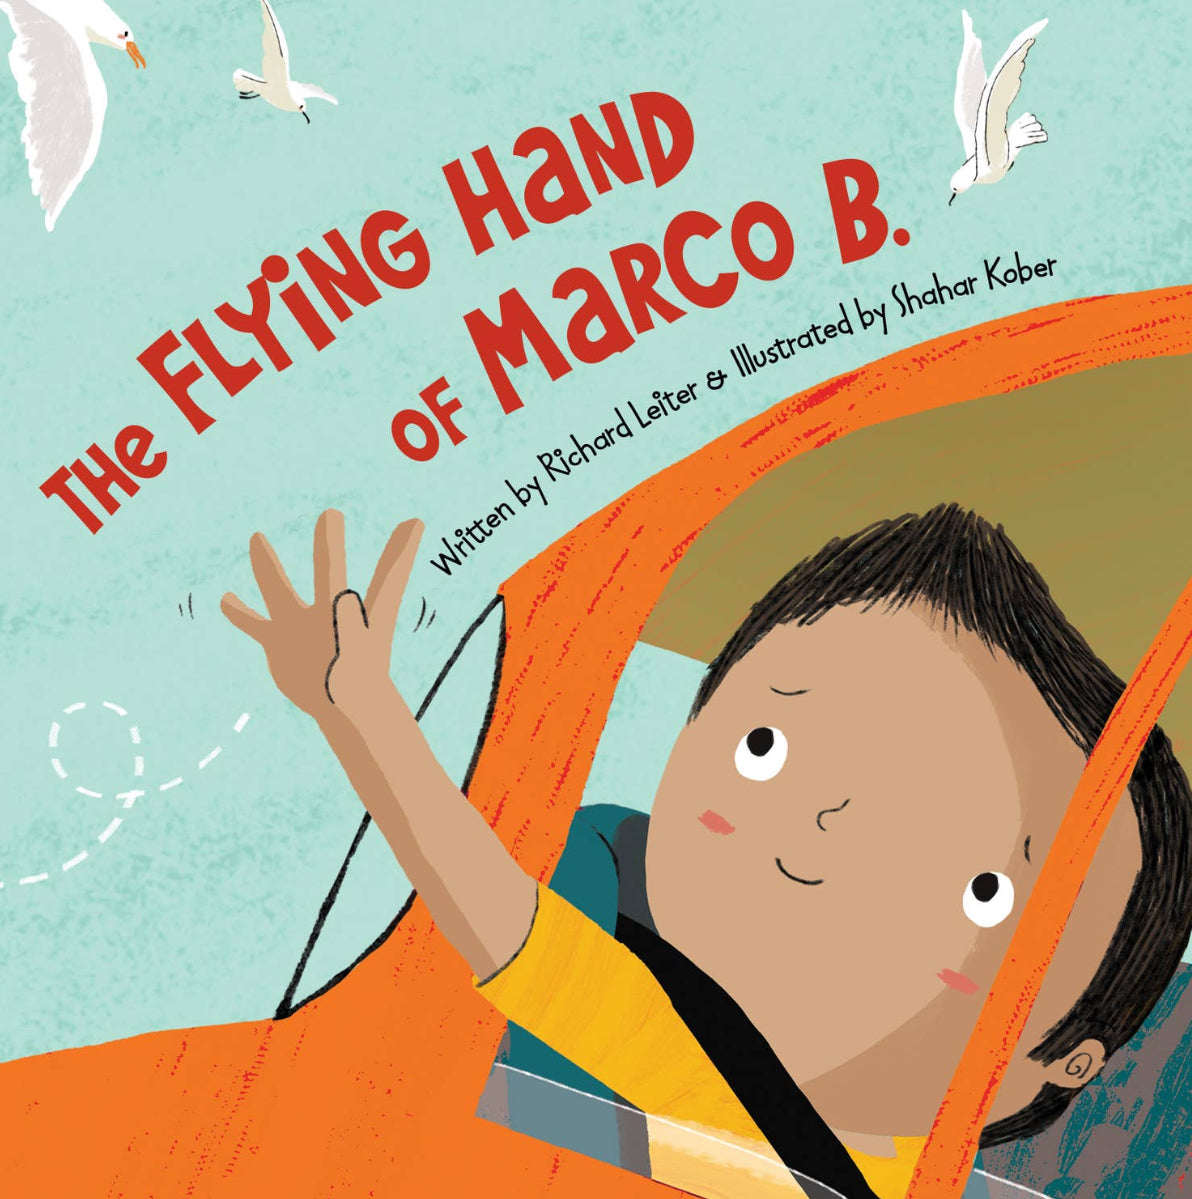 The Flying Hand of Marco B